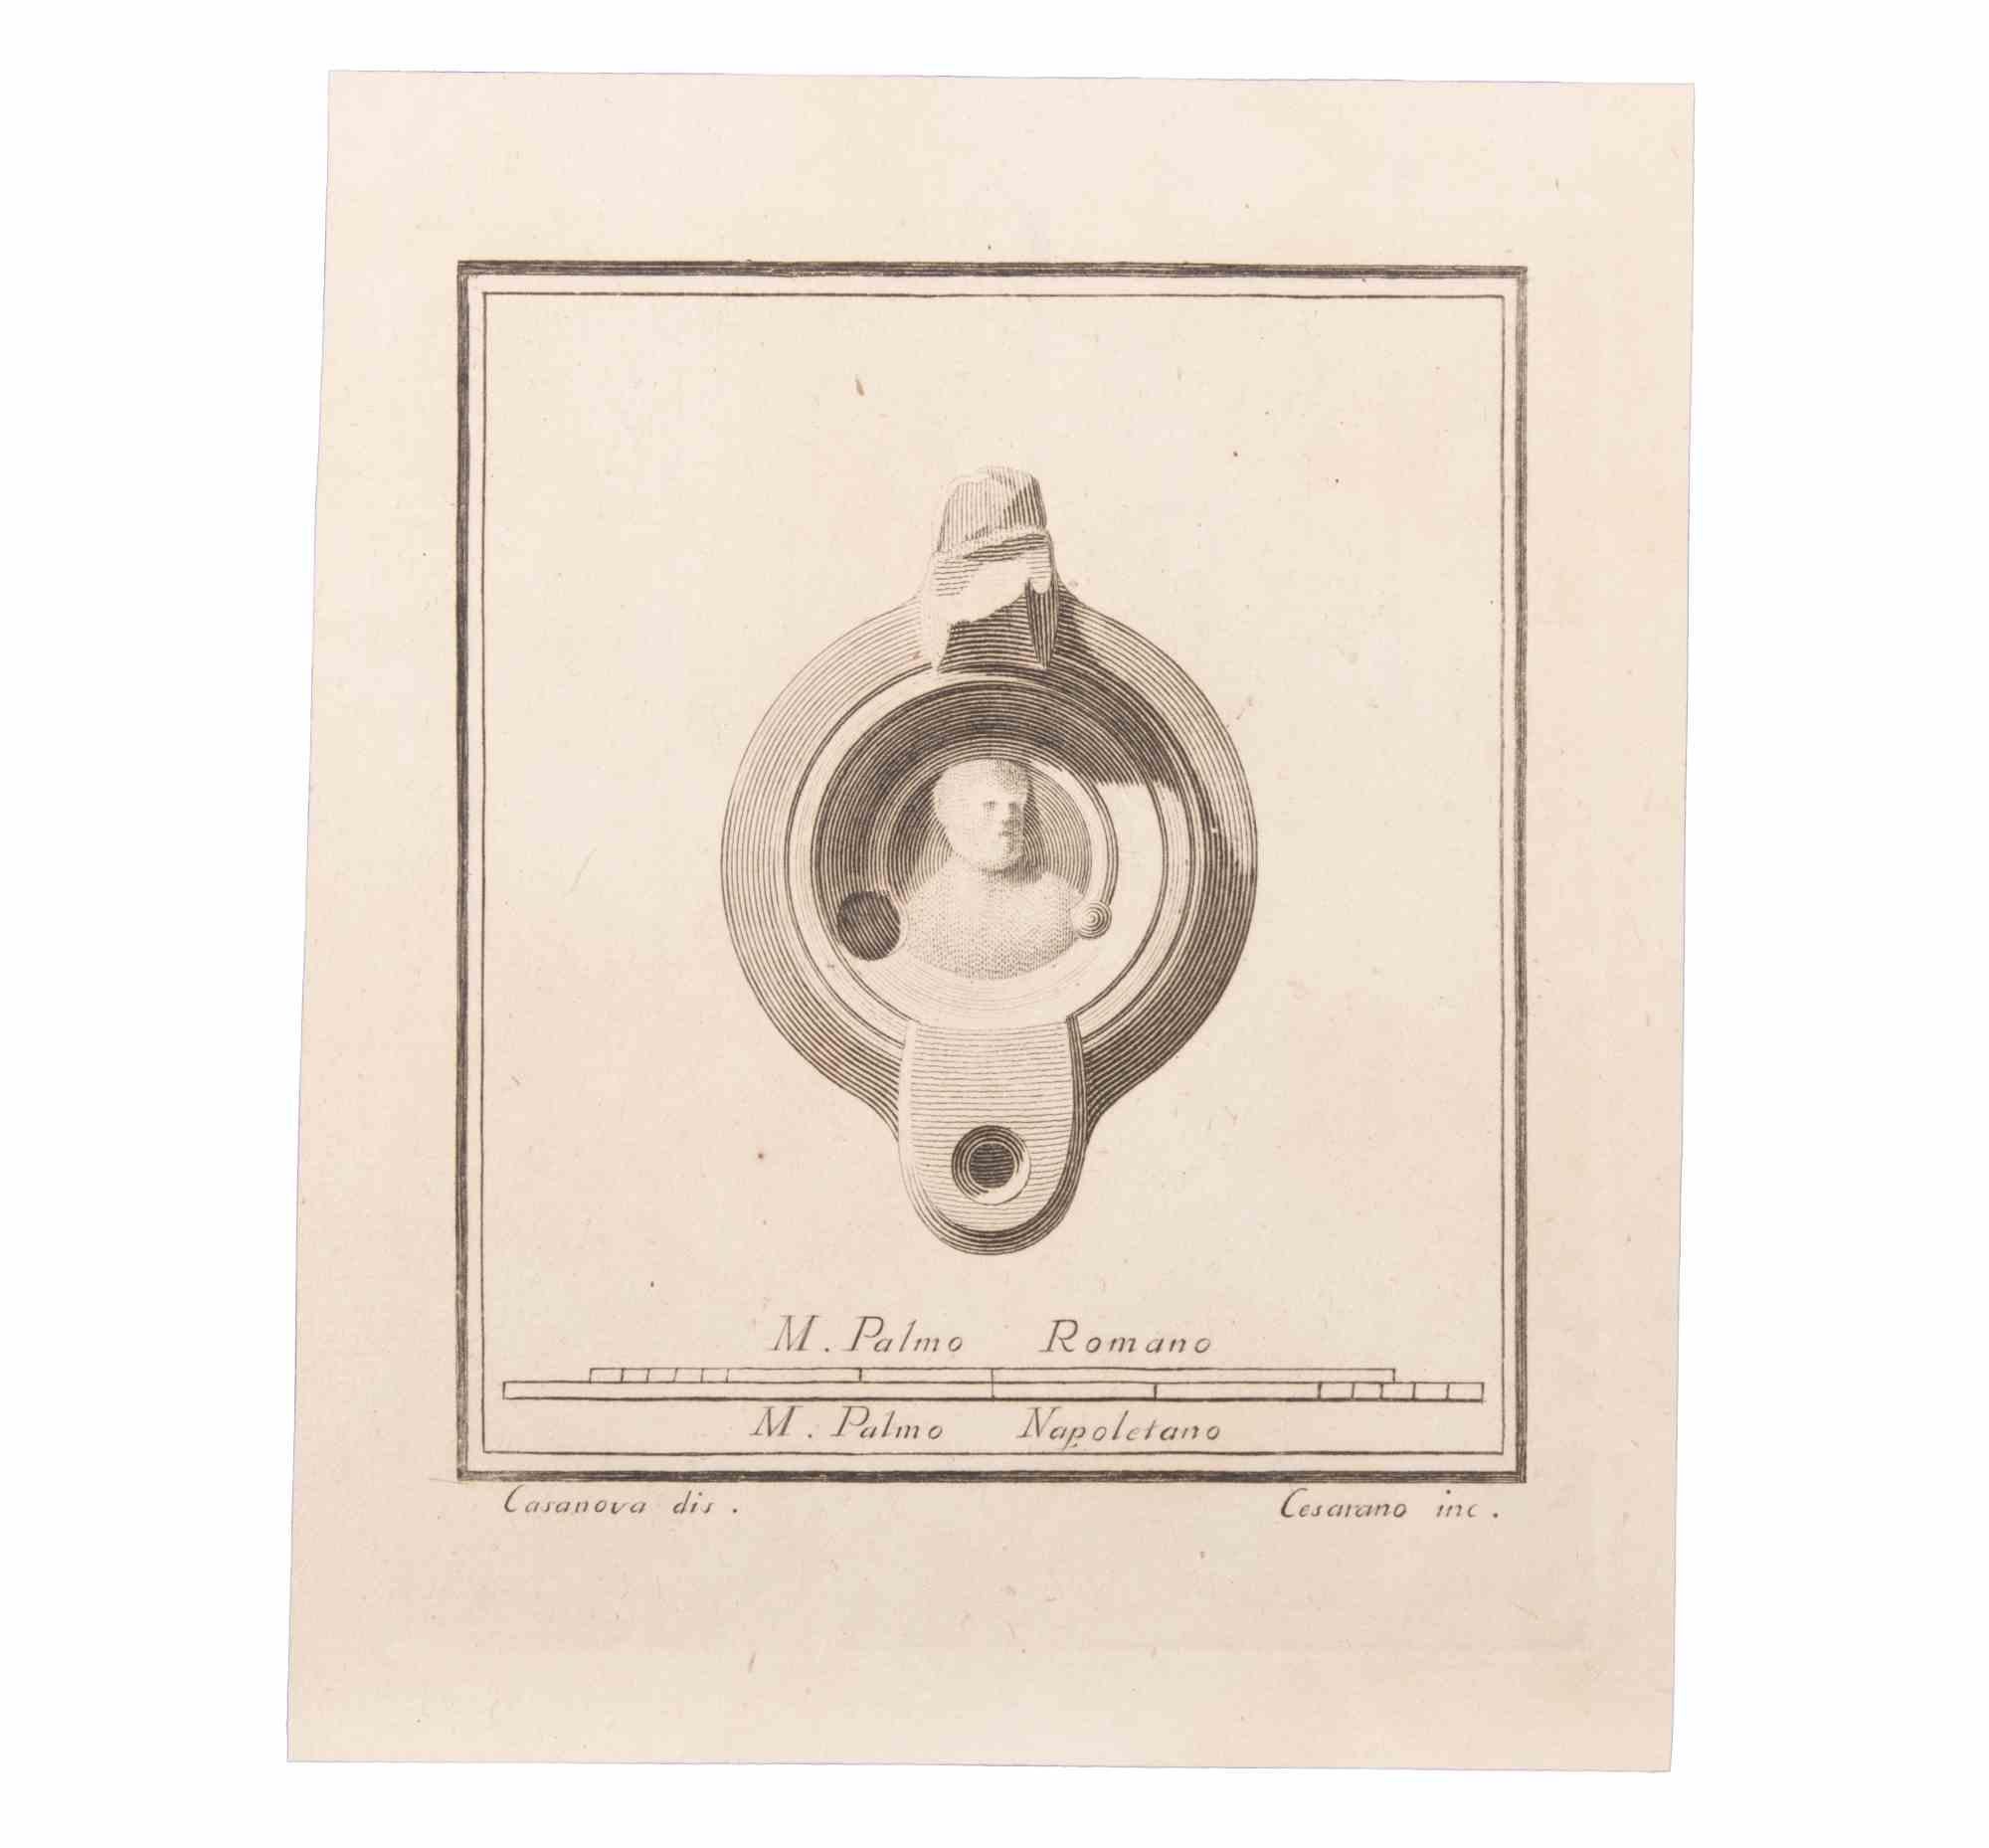 Oil Lamp With Decoration is an Etching realized by Niccolò Cesarano (1740-1815).

The etching belongs to the print suite “Antiquities of Herculaneum Exposed” (original title: “Le Antichità di Ercolano Esposte”), an eight-volume volume of engravings